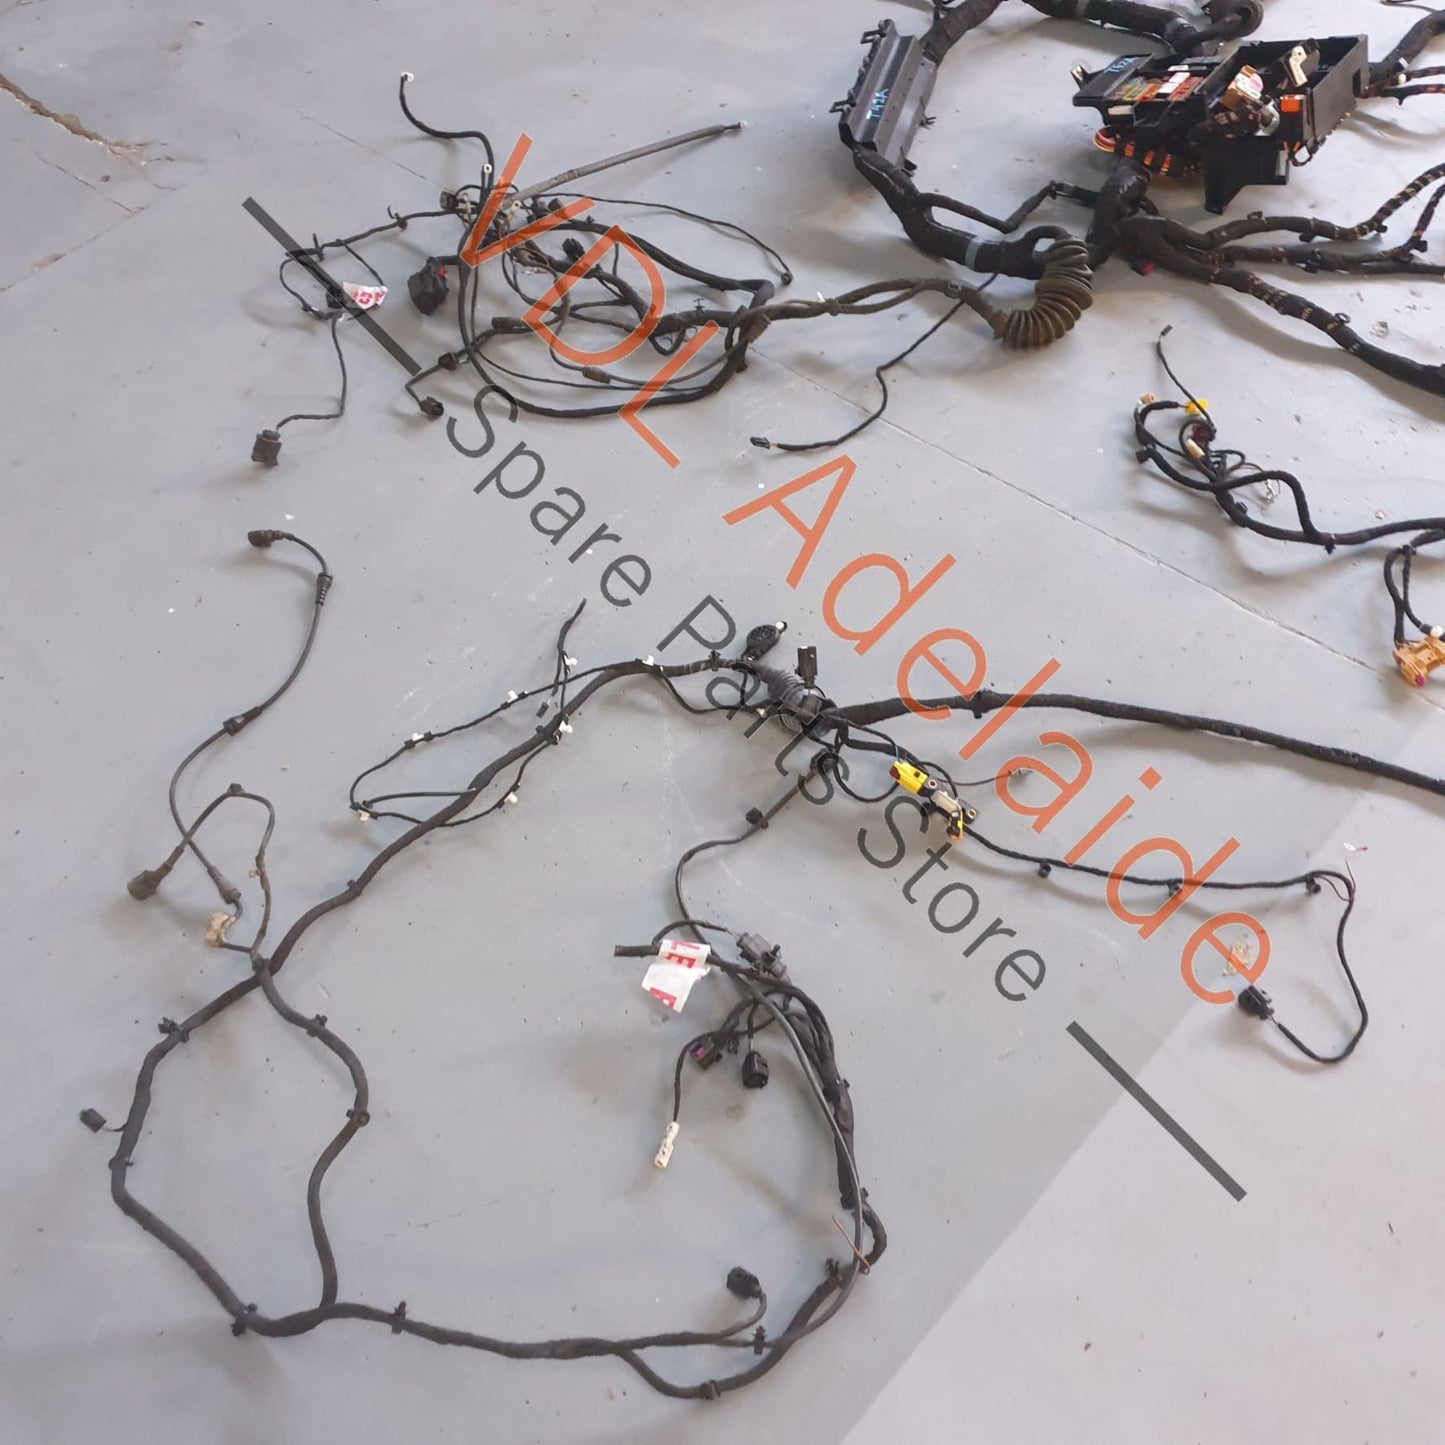 Audi R8 422 423 Wiring Harness for Interior Main Body Loom Cable for V10 RHD